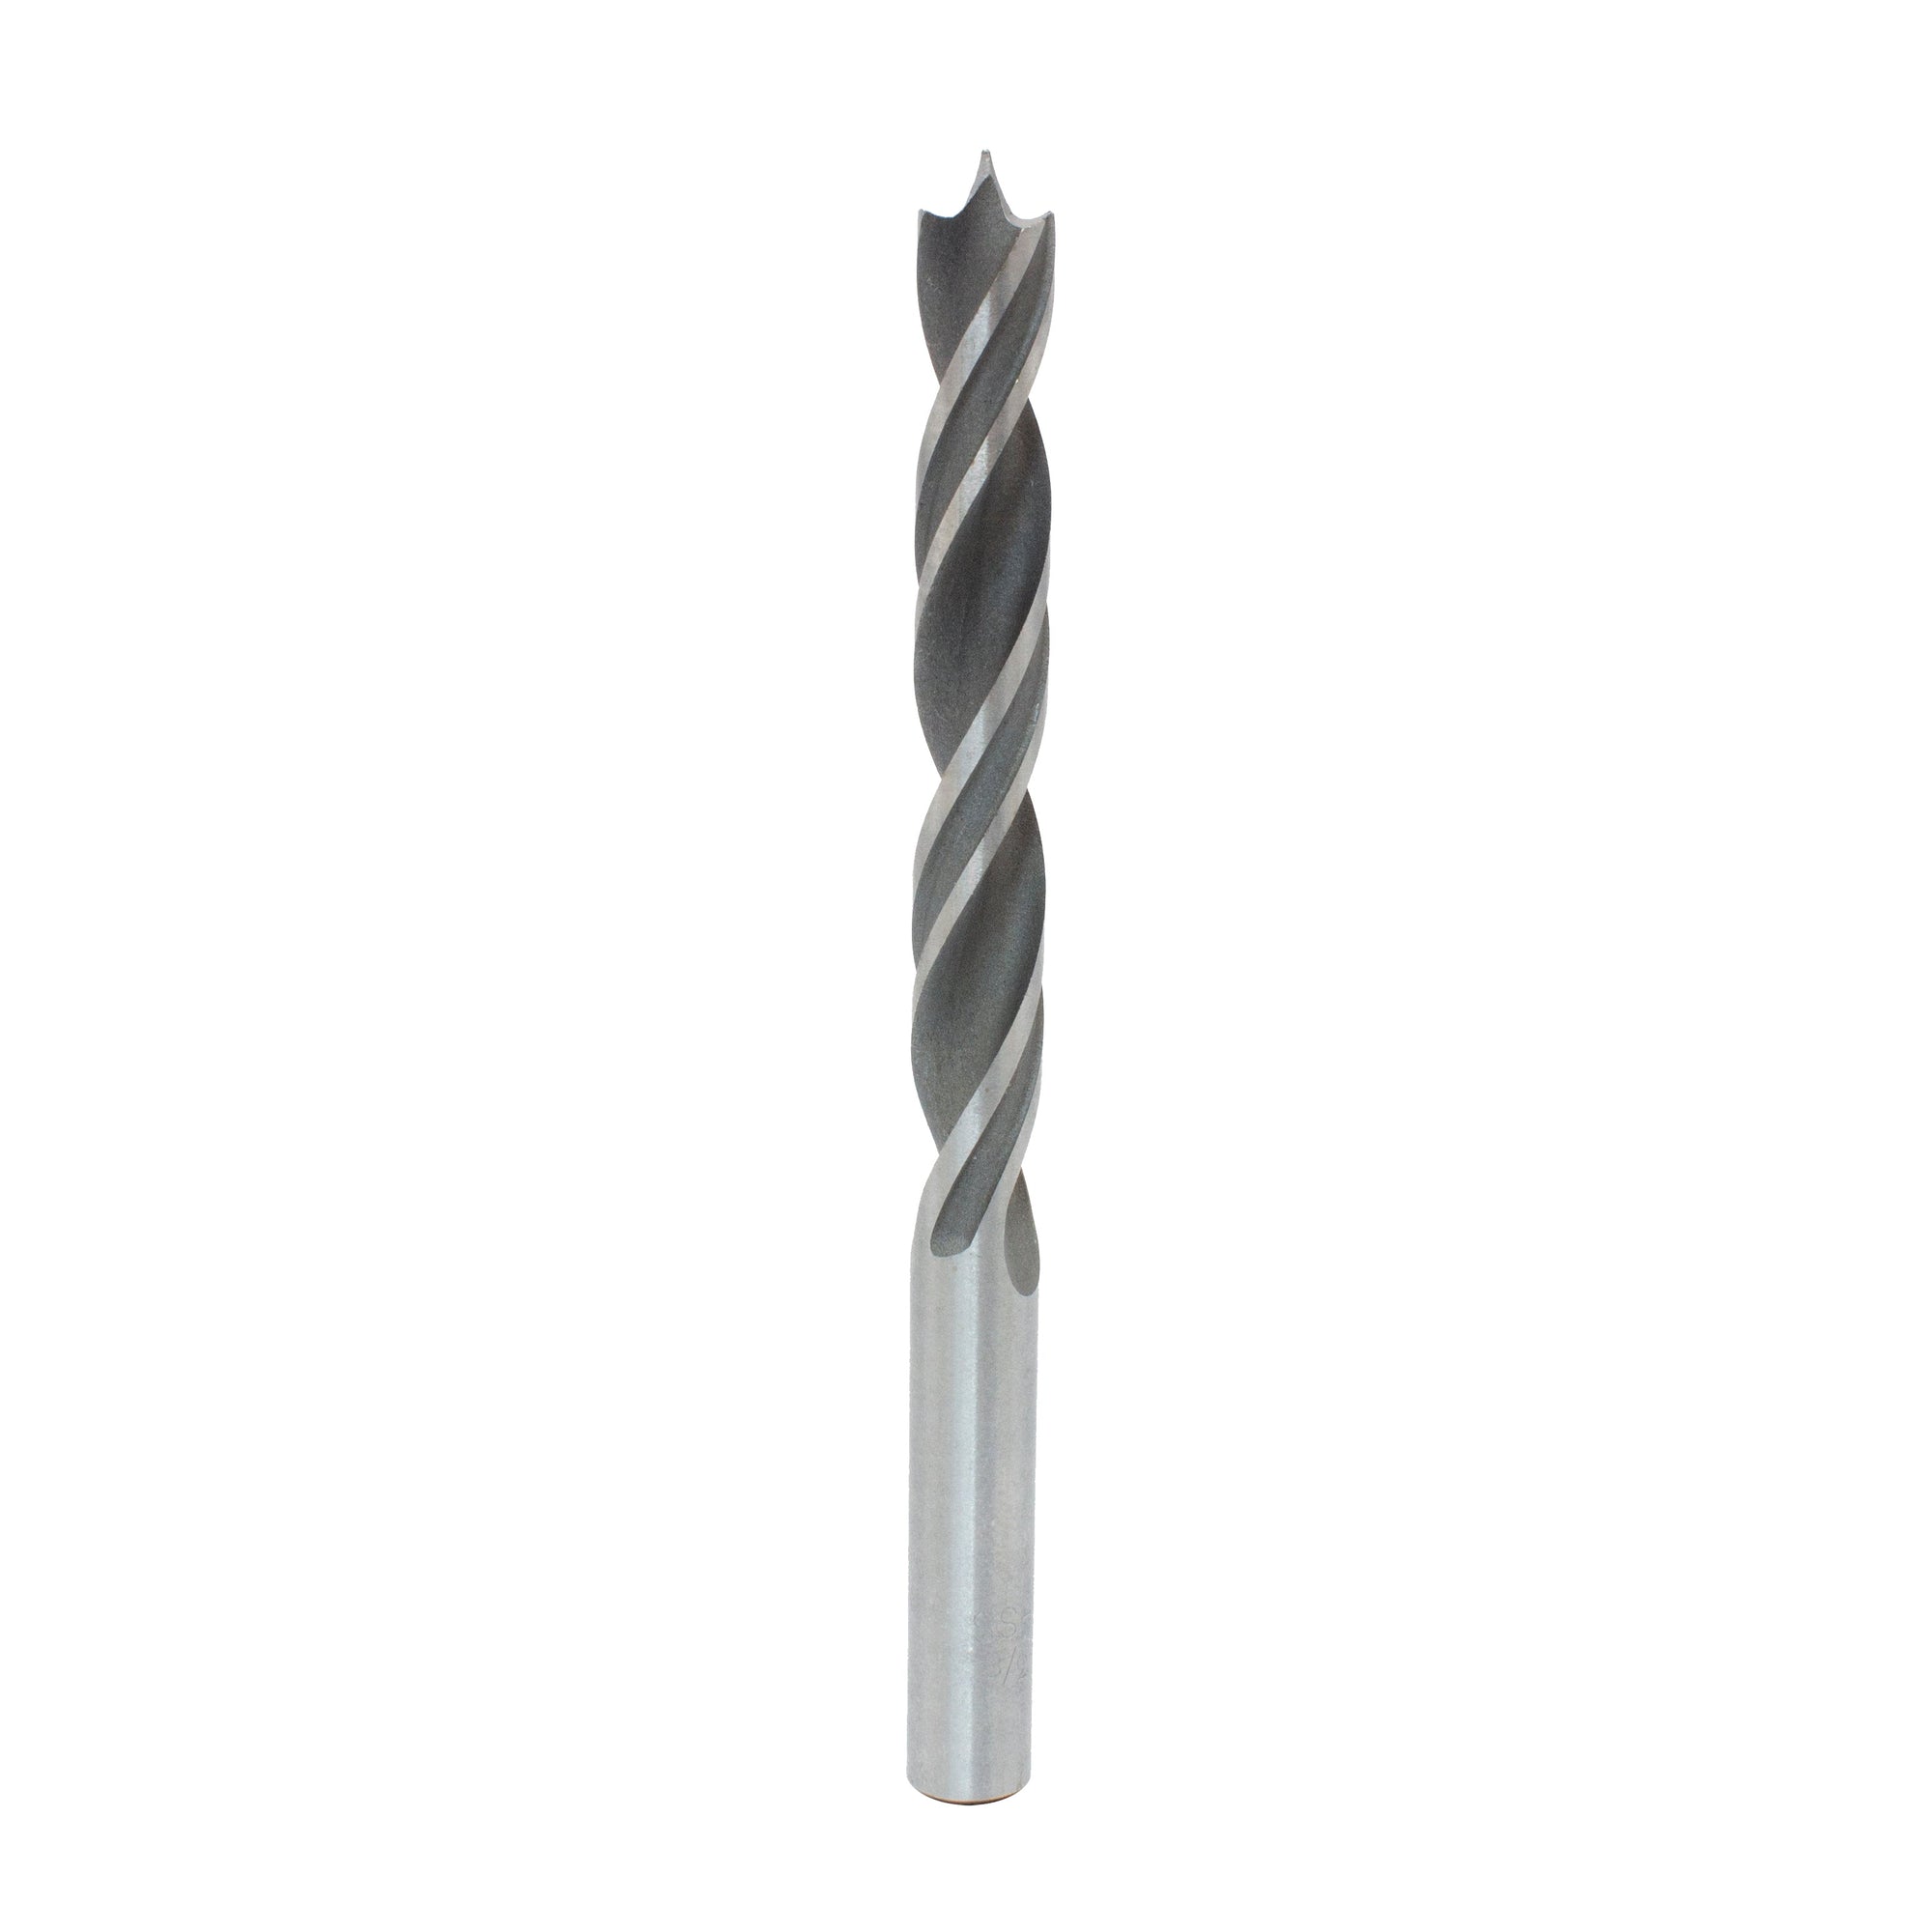 10mm Brad Point Drill Bit (used with our M6 Inserts for hardwood applications)